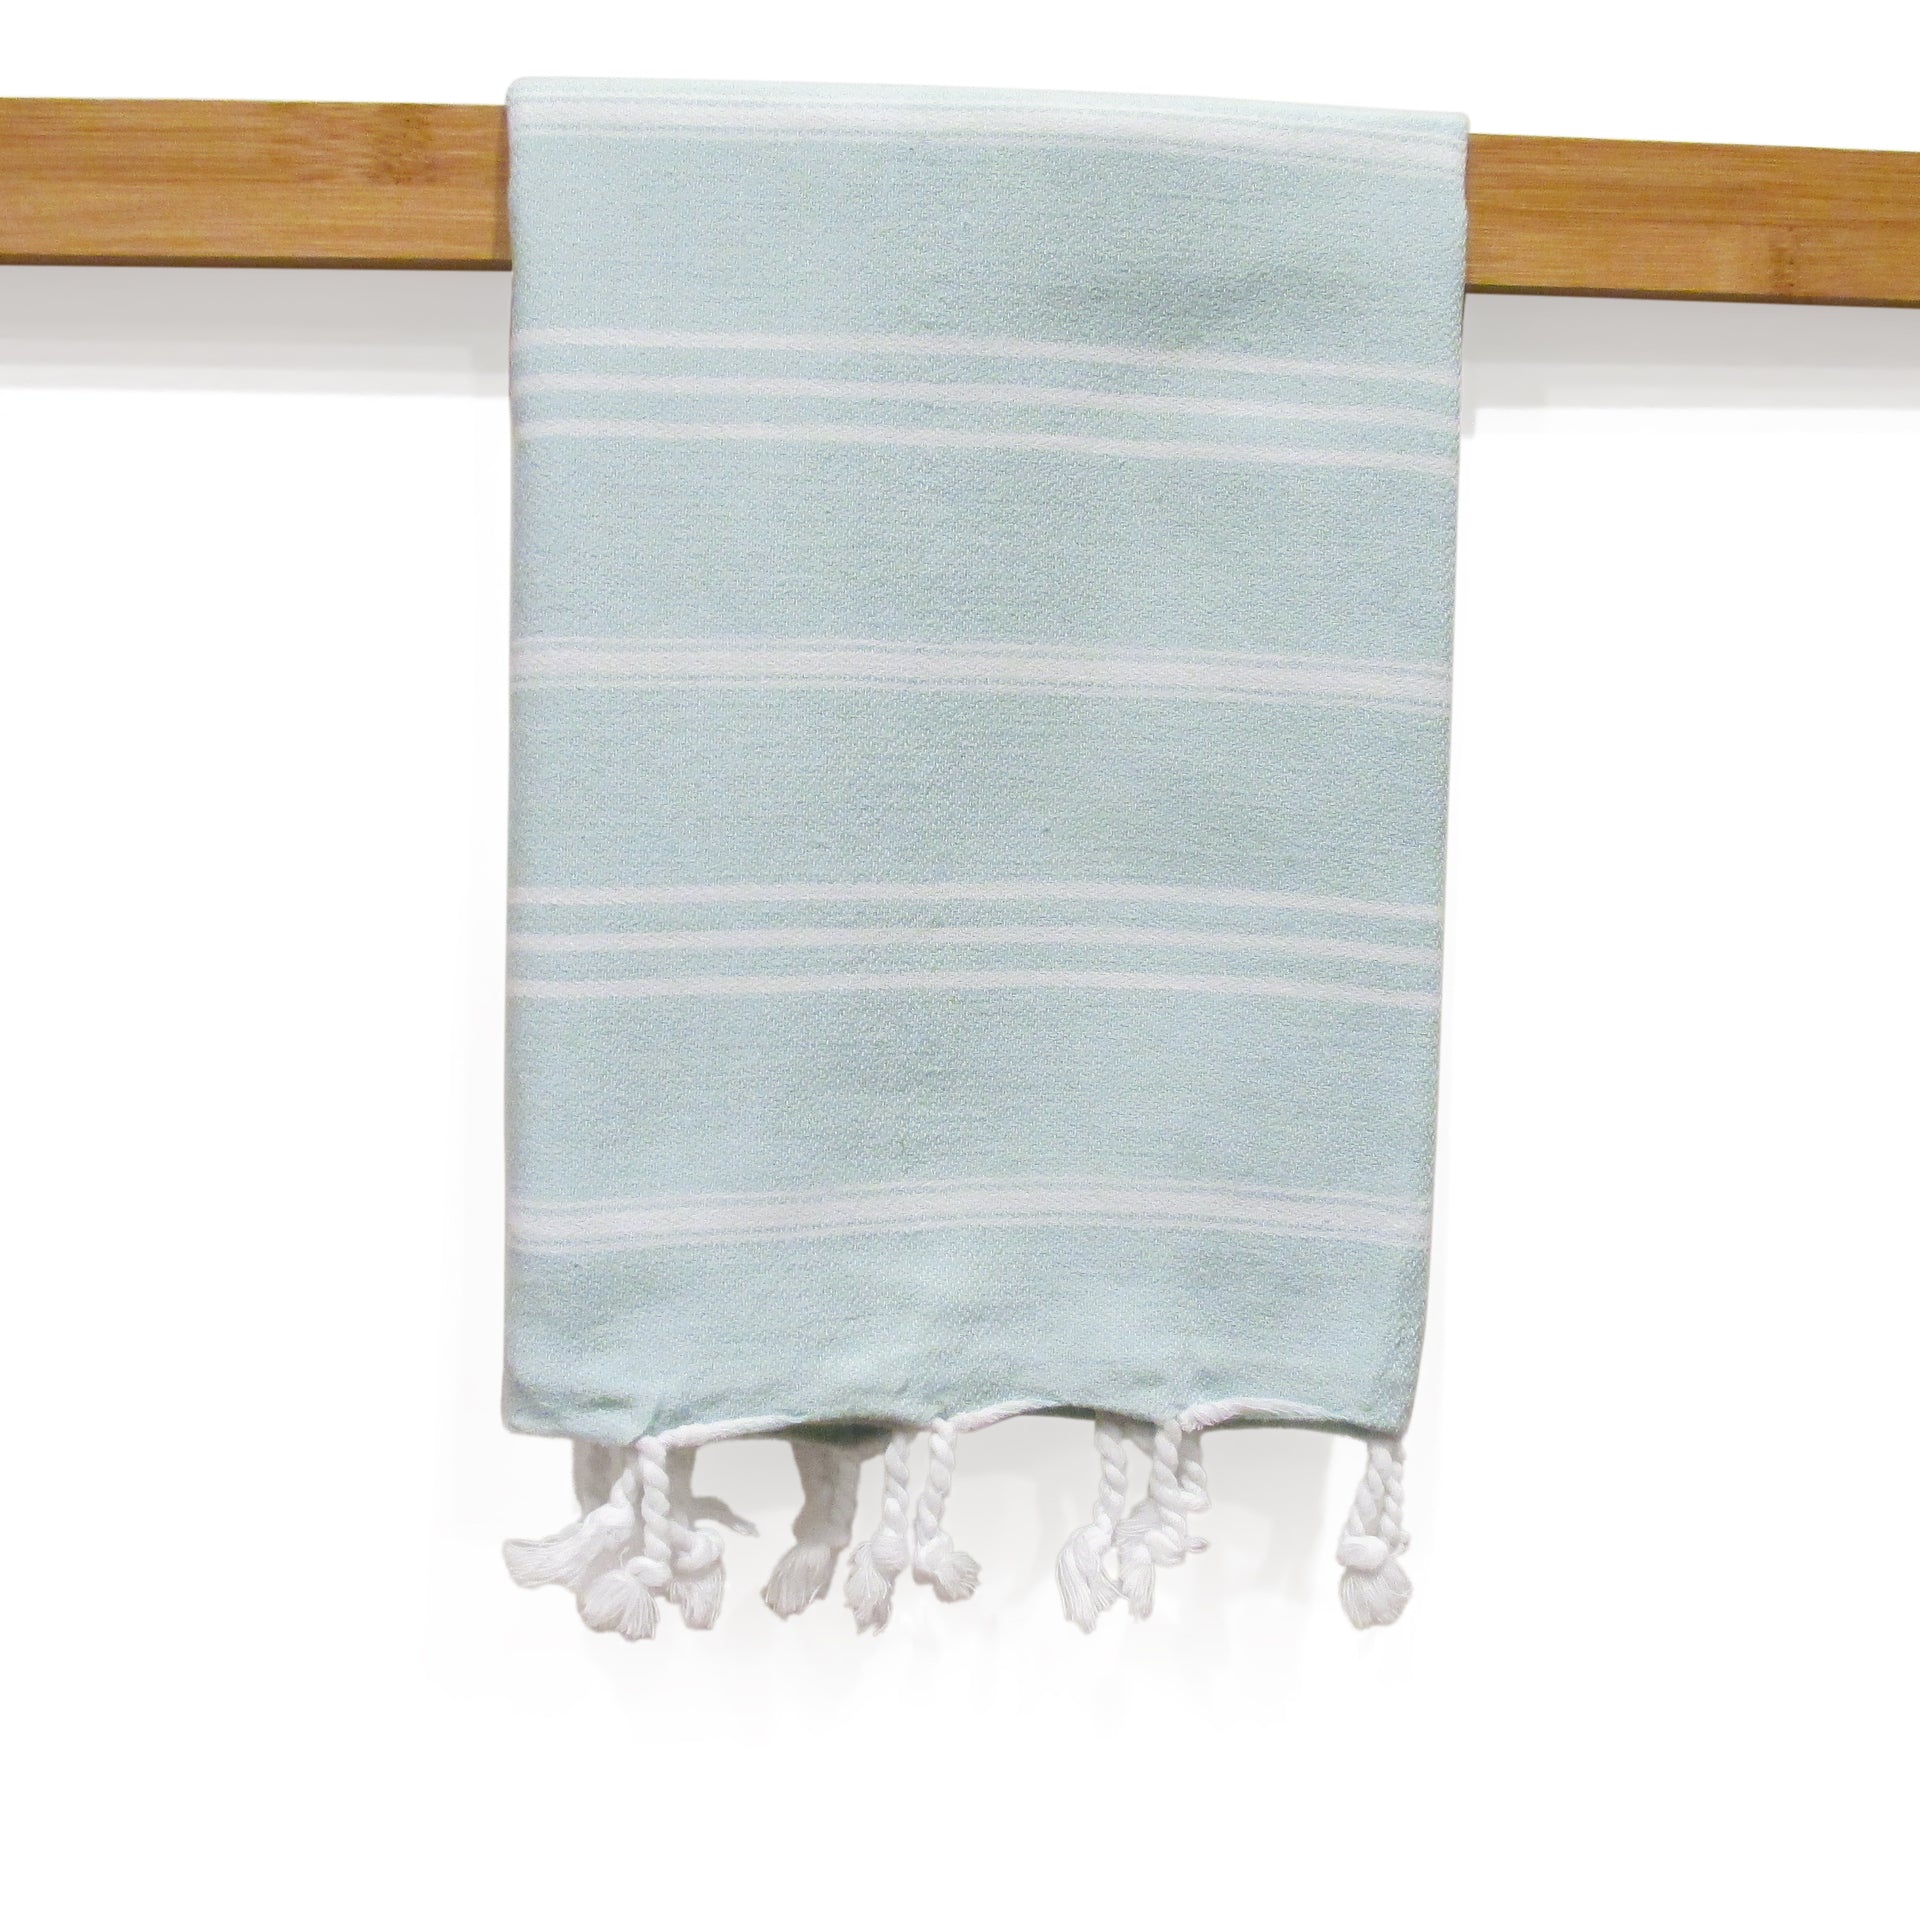 Stripe Turkish Hand Towel – Priti Collection. Tools for an enlightened life.